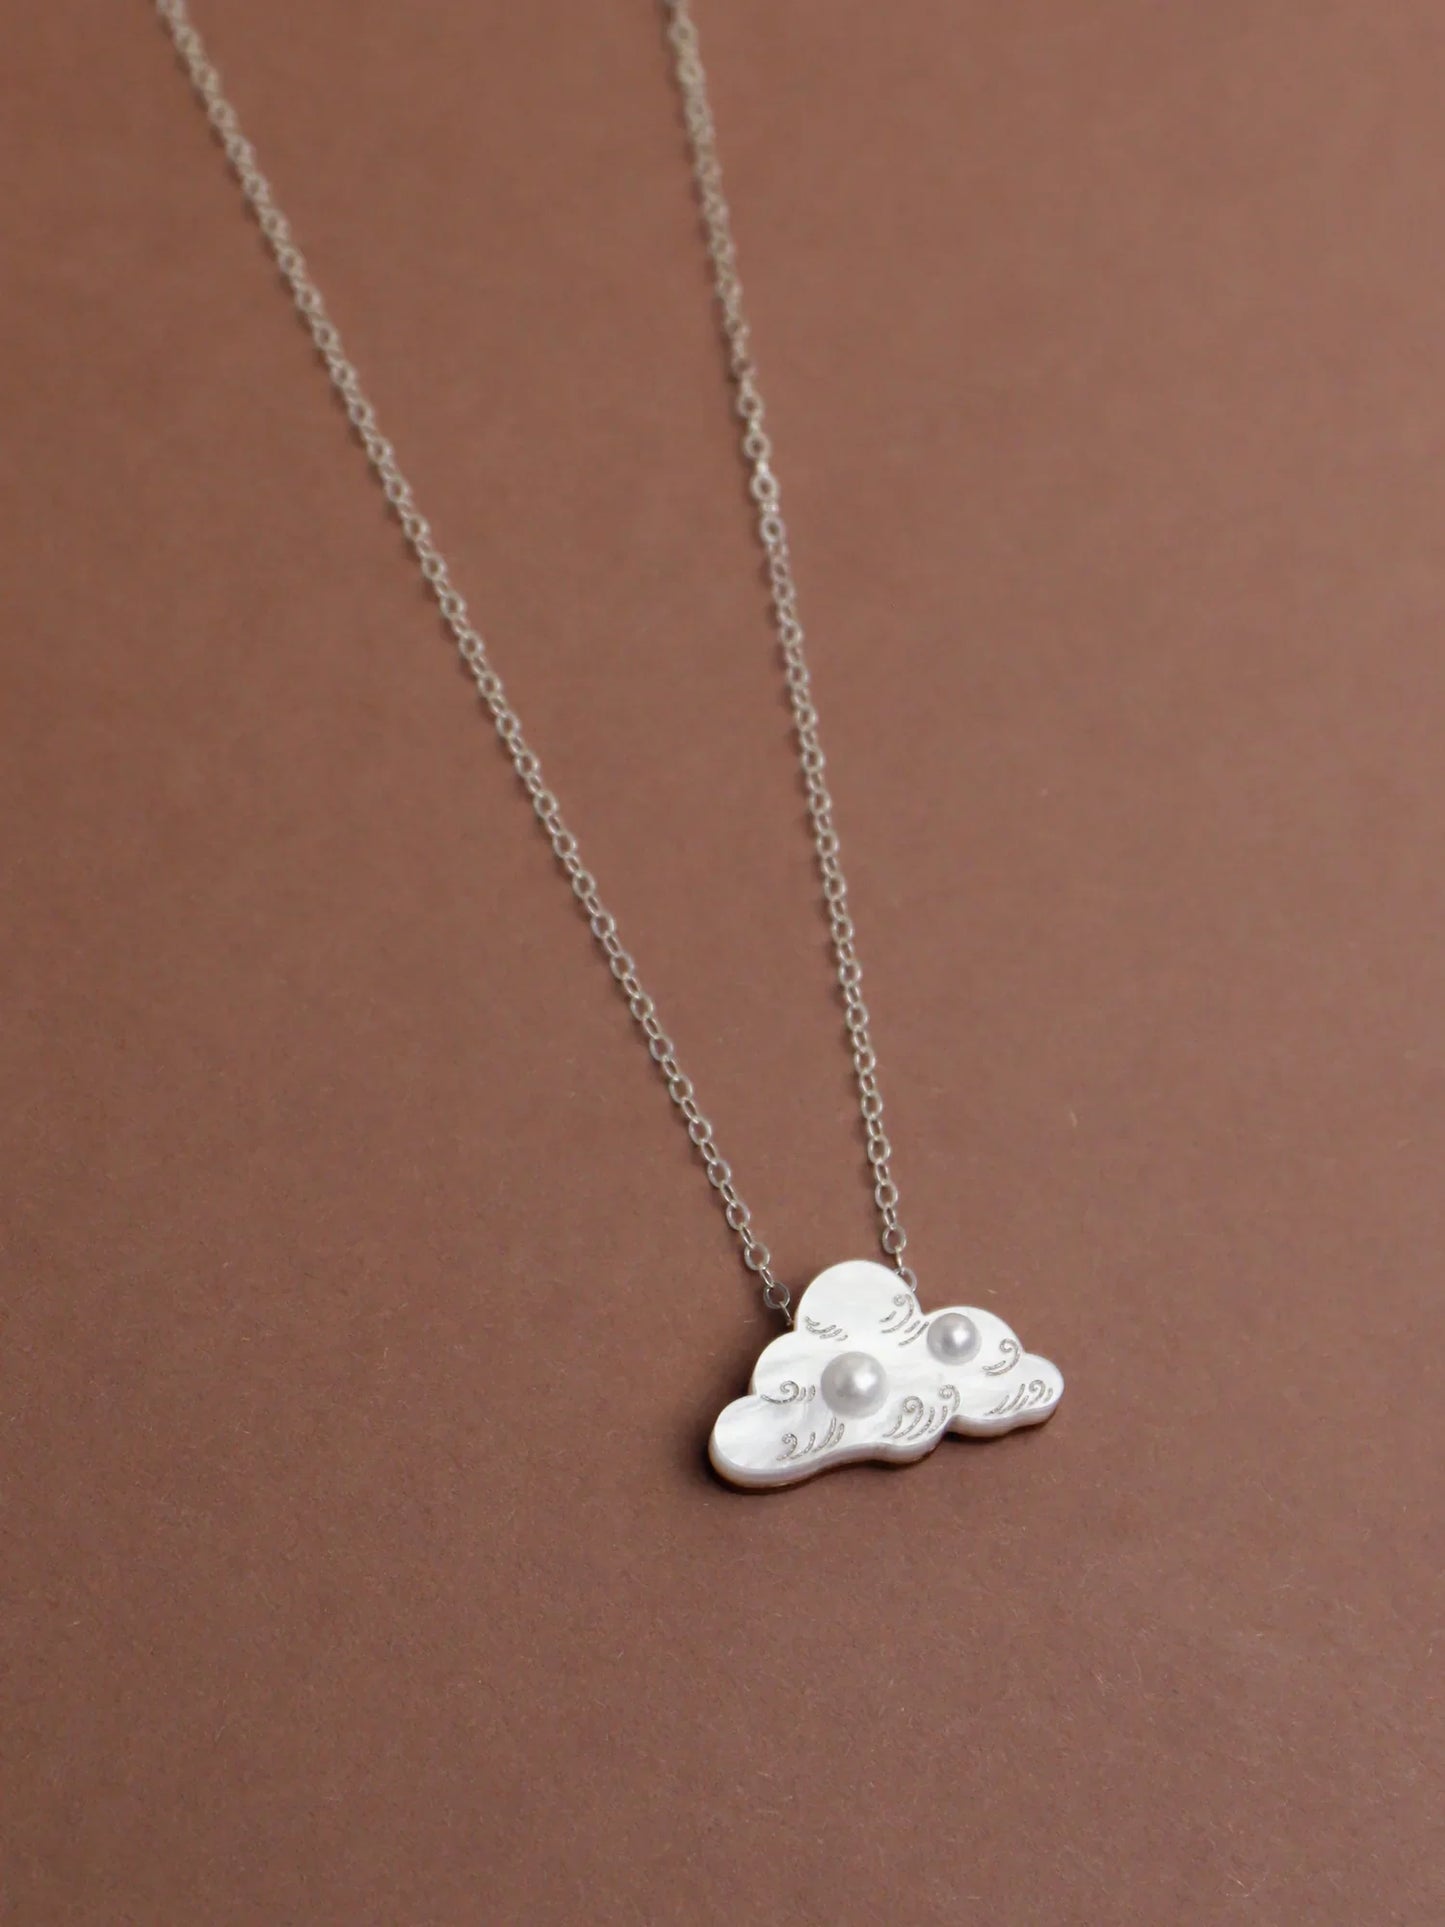 The Every Space Cloud necklace in sterling silver and acrylic by Wolf & Moon